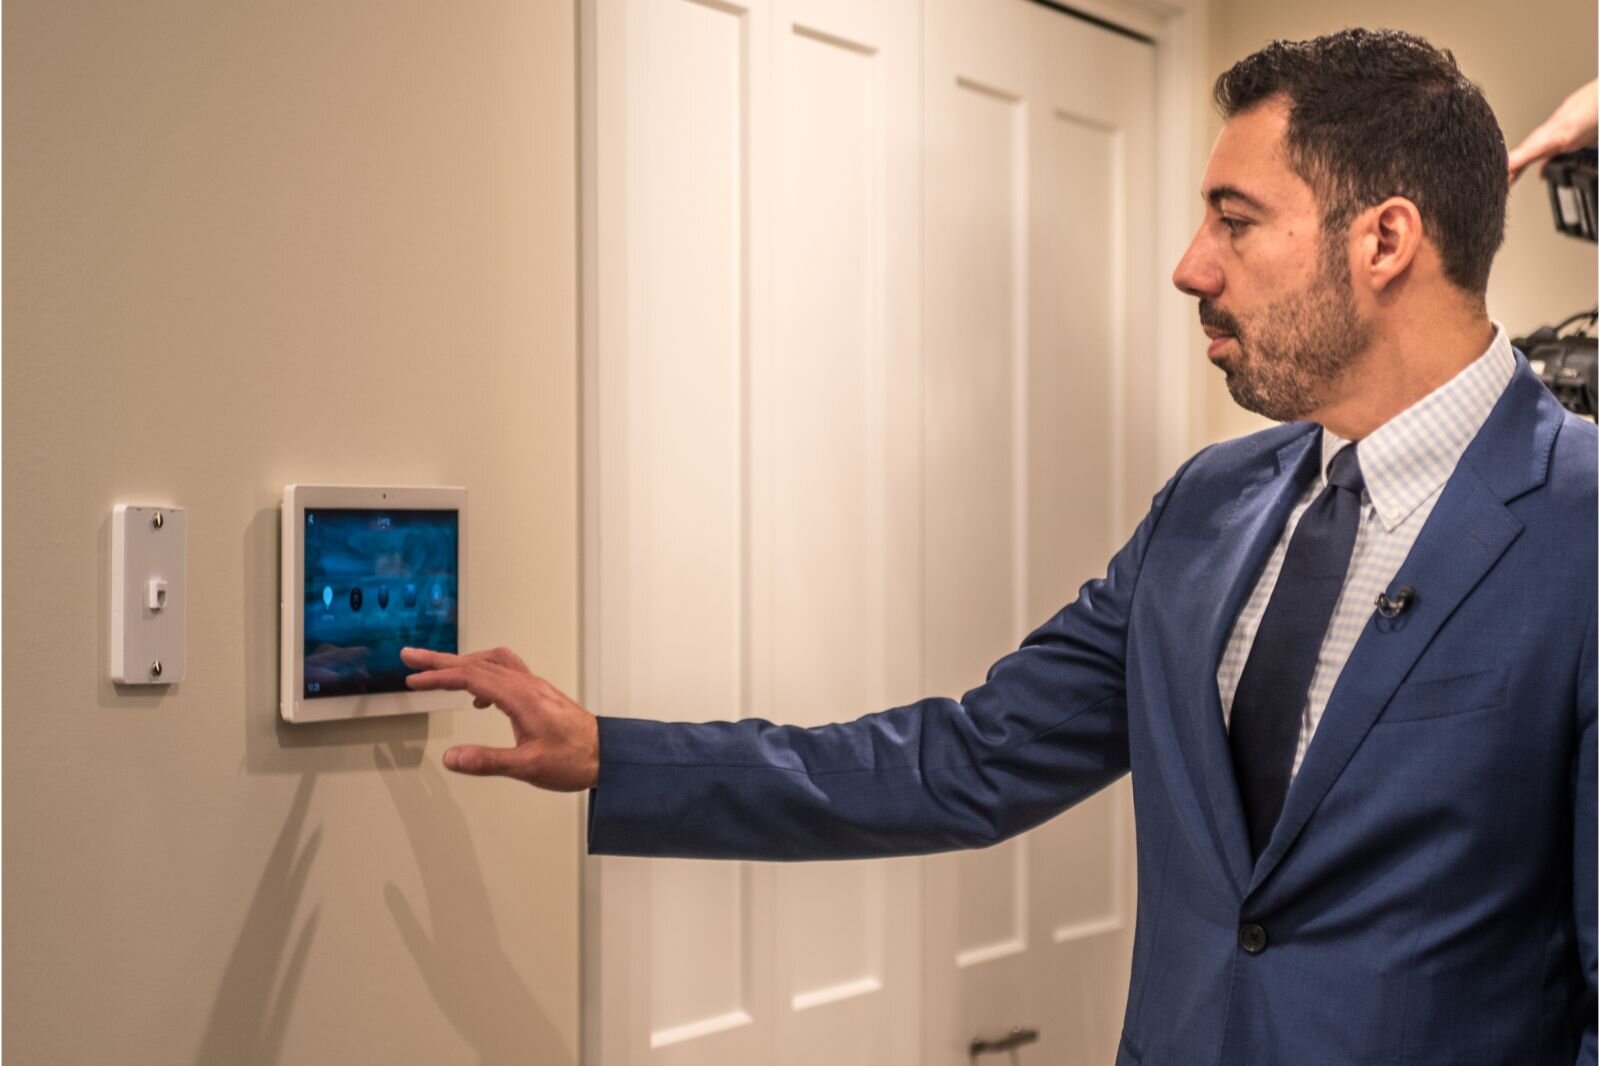 Jay Prince, President and CEO of Heritage Community of Kalamazoo, is shown demonstrating a home automation system that allows residents of Revel Creek to adjust their living environments.